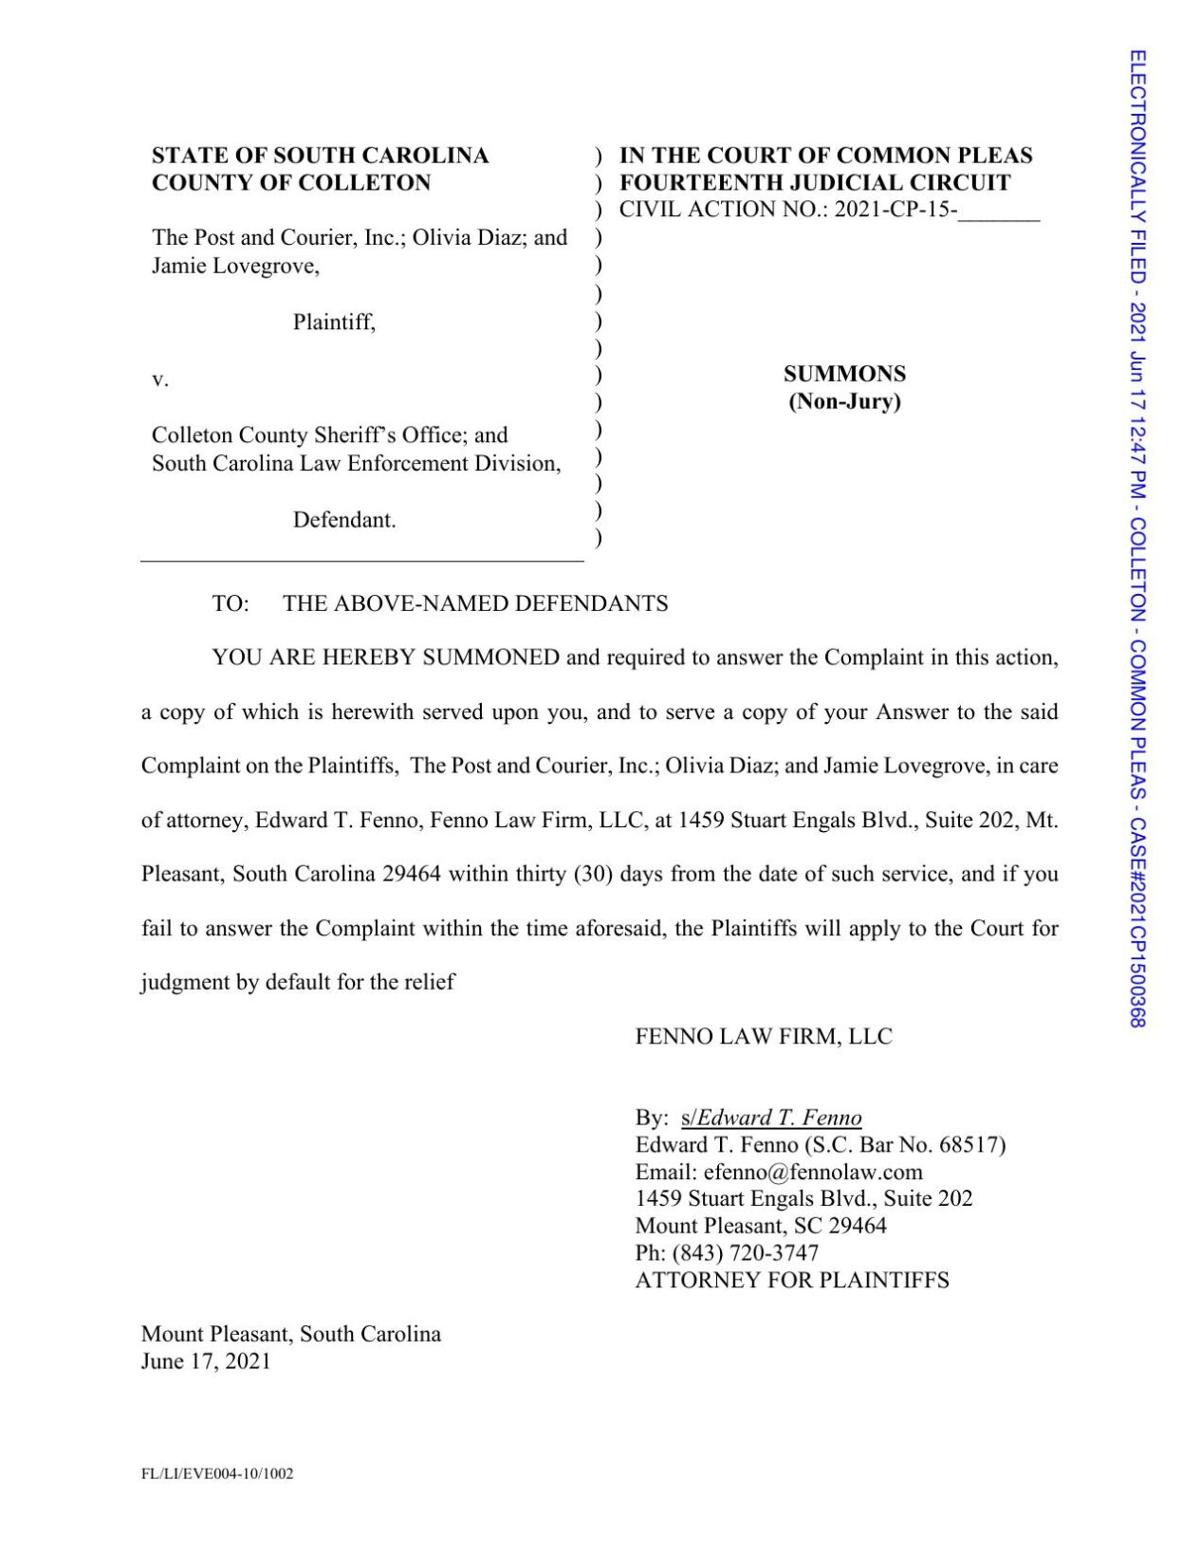 The Post and Courier's lawsuit